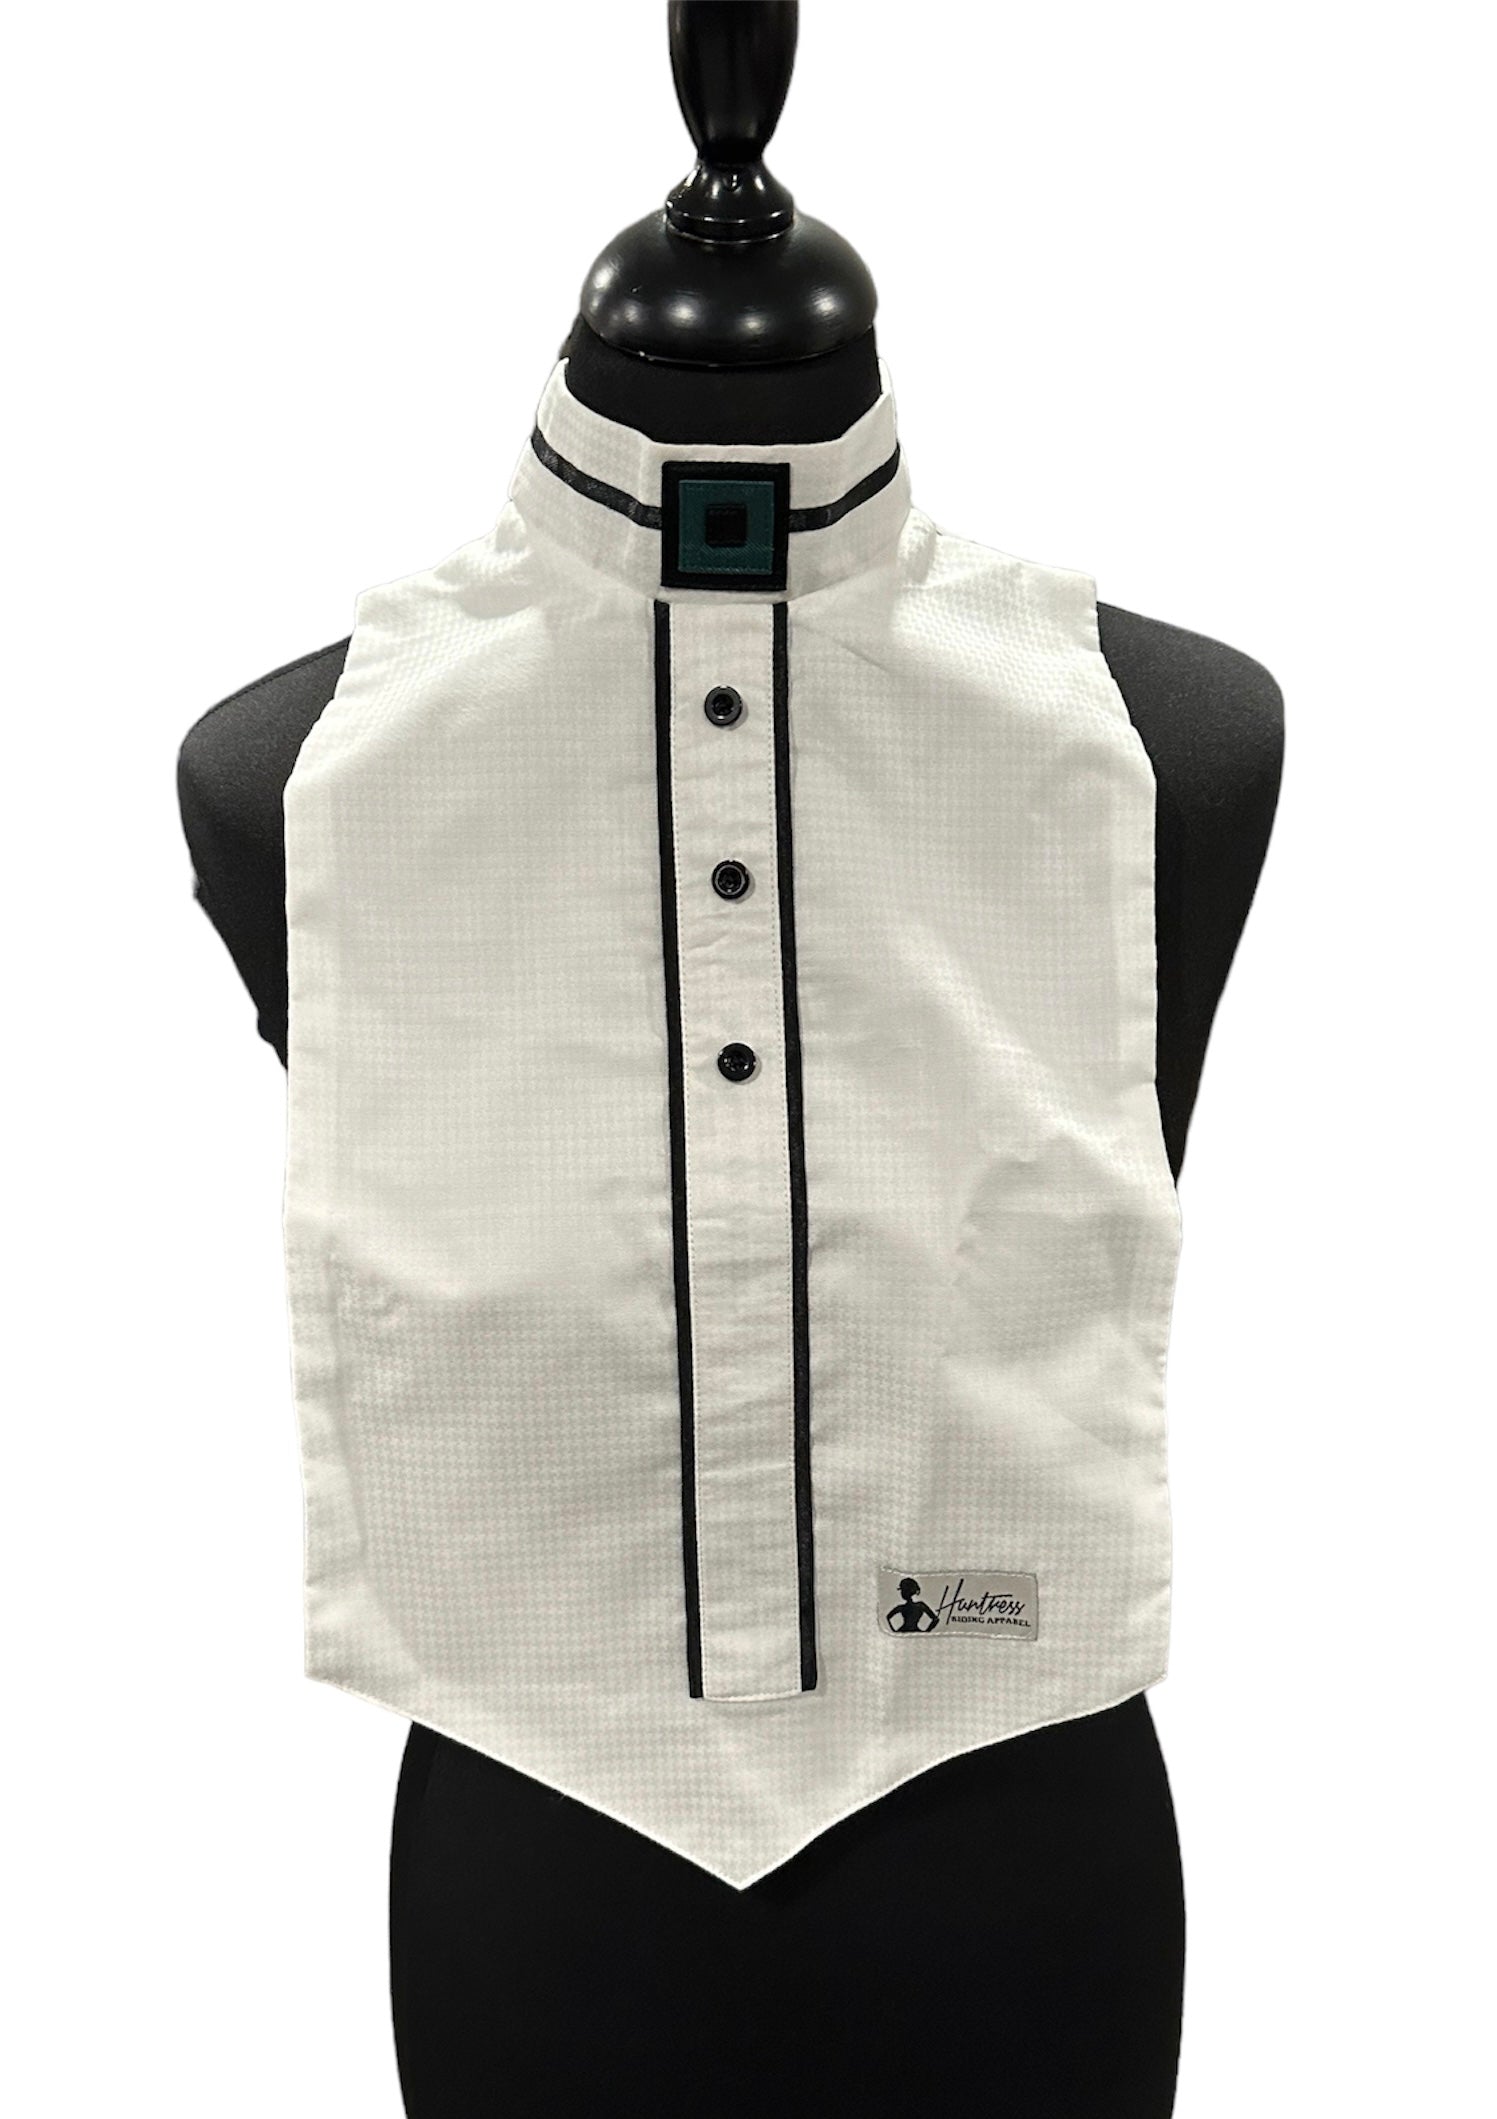 Dickie YOUTH Fabric Code C22Y White with black and hunter